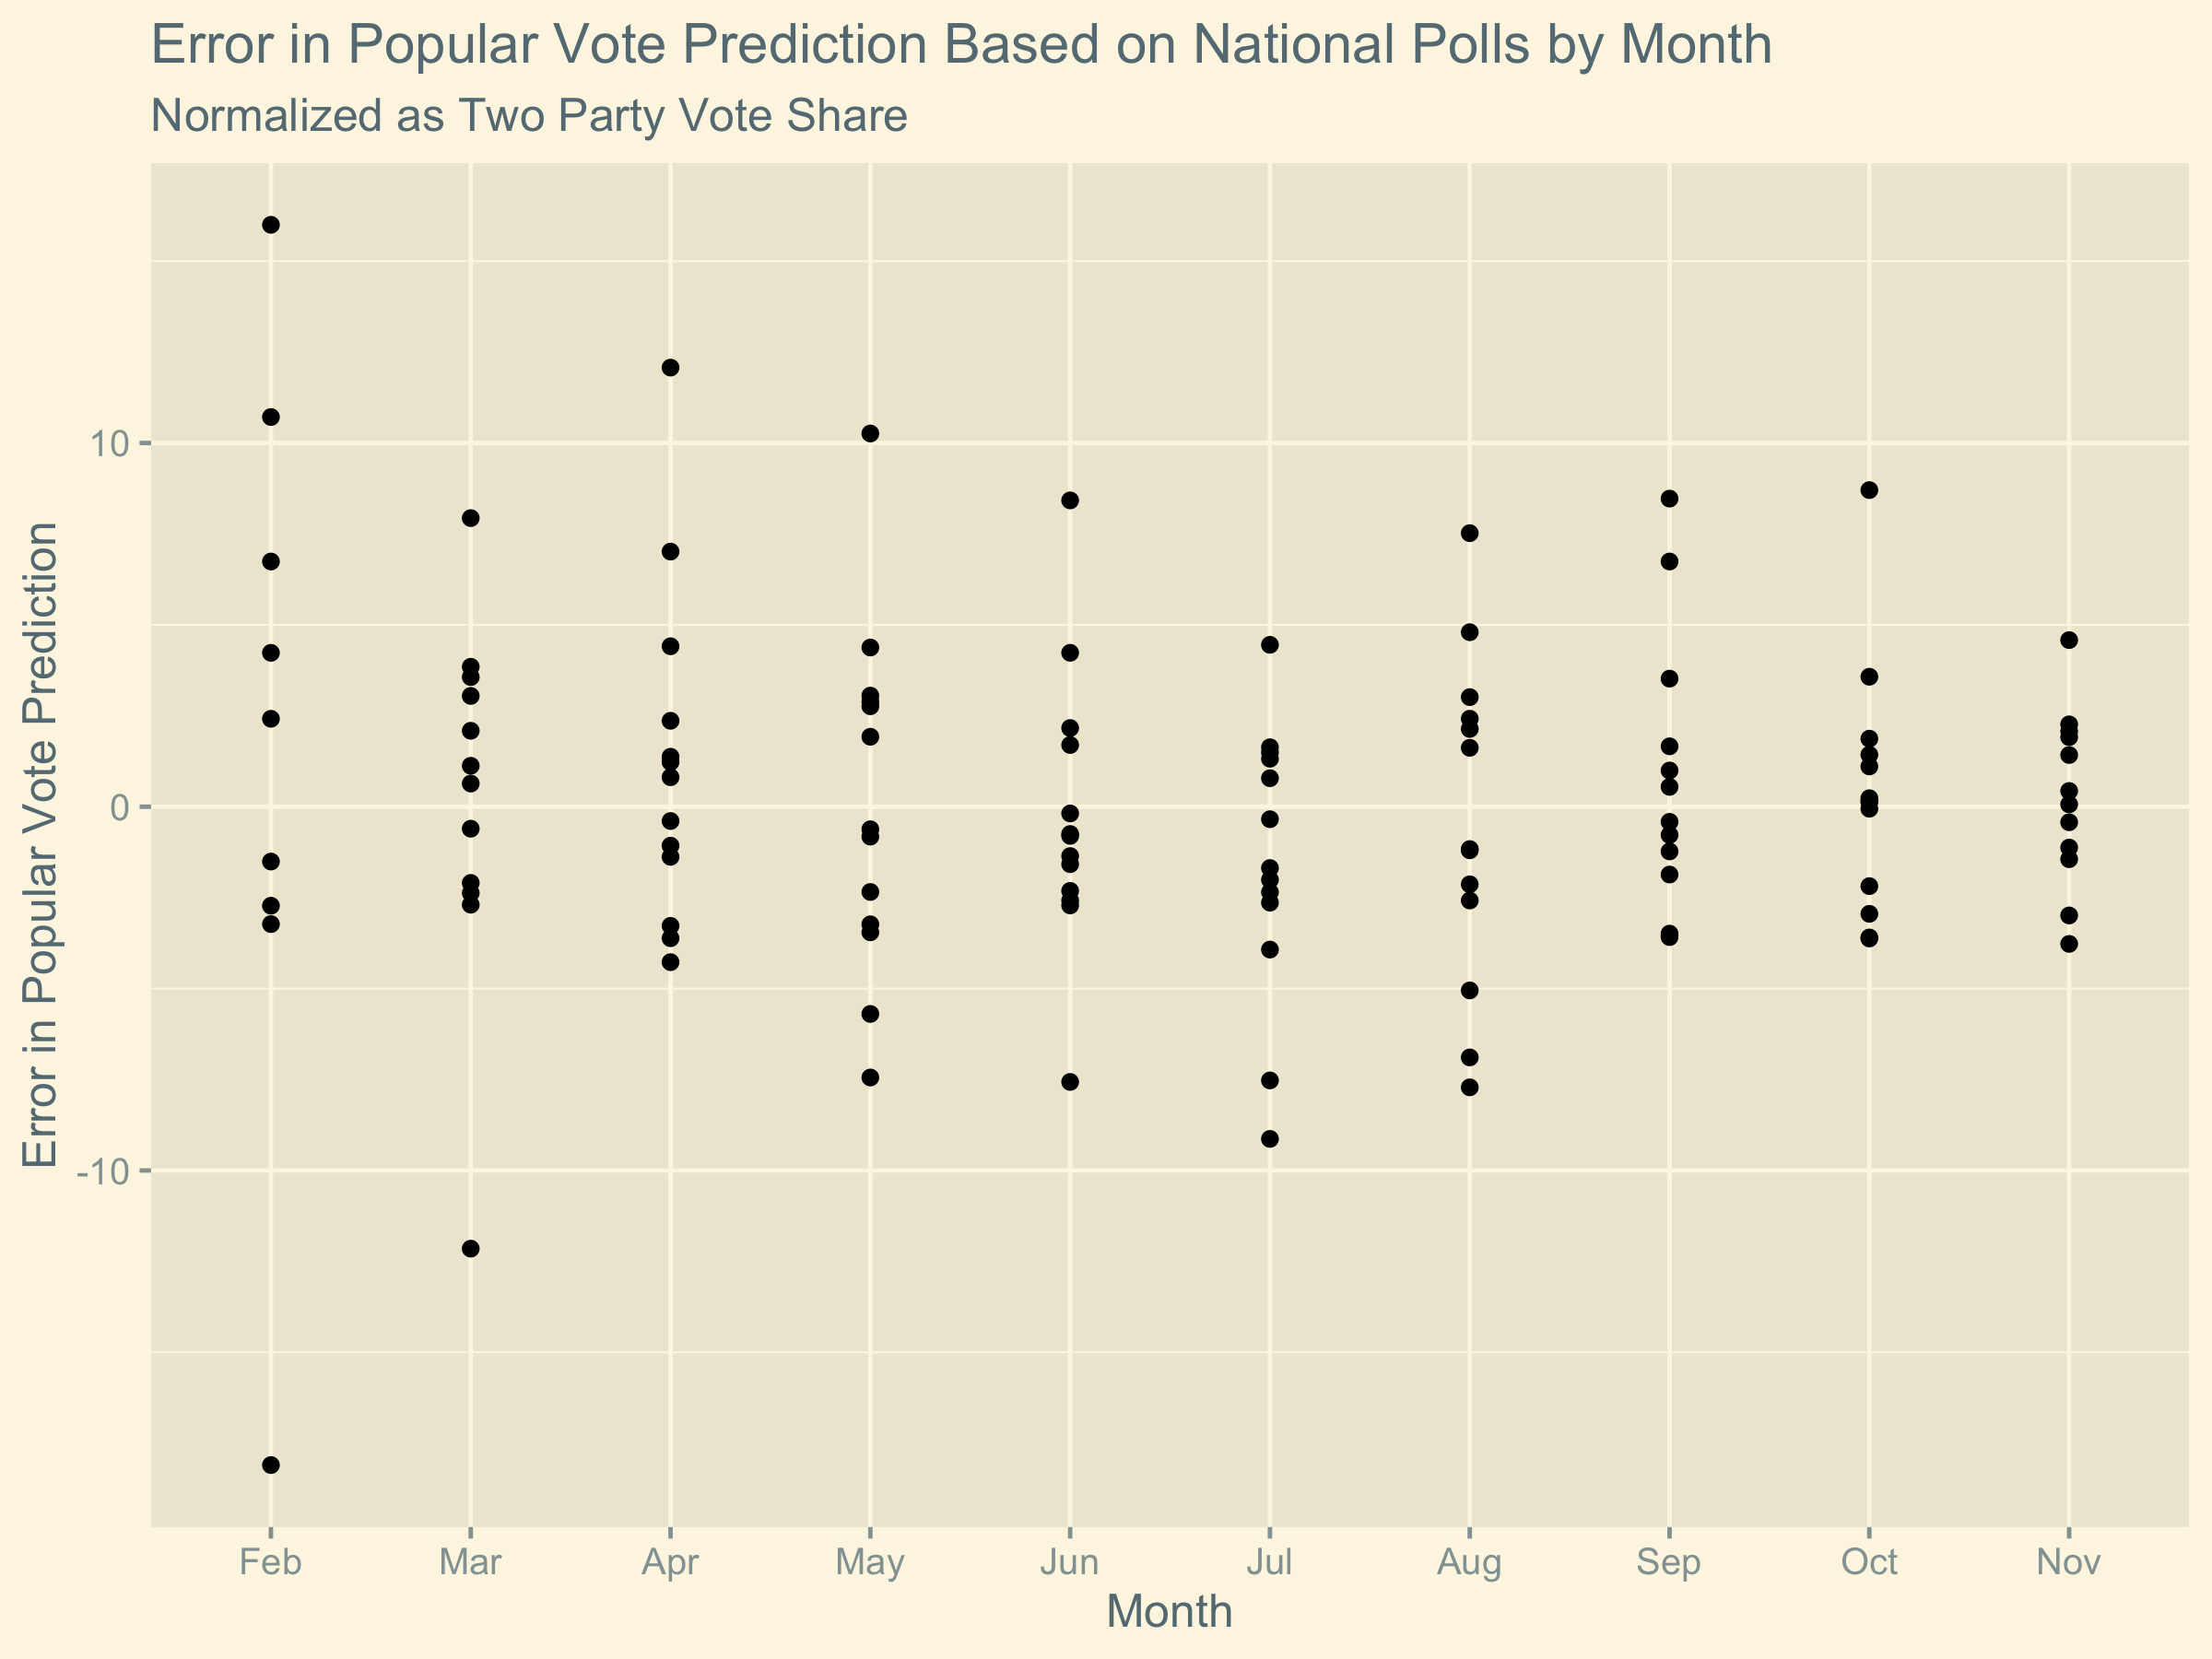 image of national poll accuracy by month